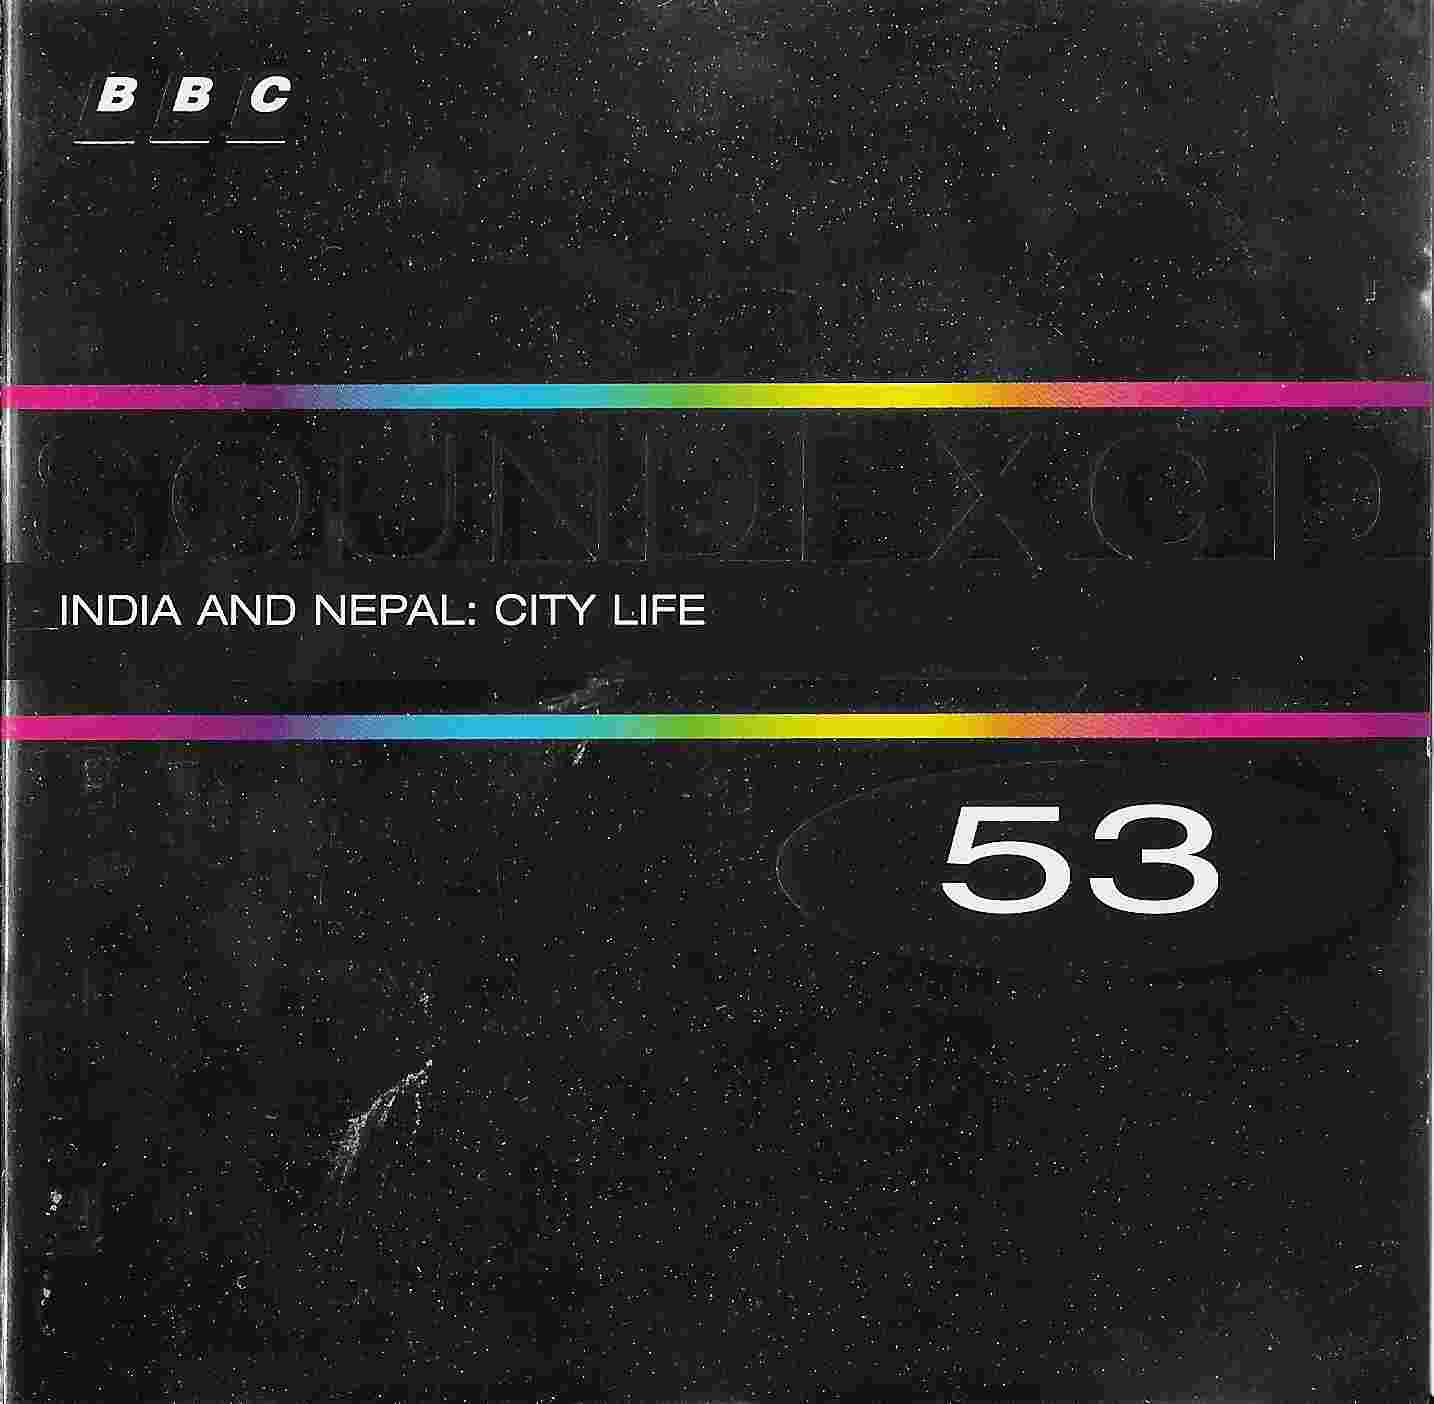 Picture of BBCCD SFX053 India and Nepal: City life by artist Various from the BBC cds - Records and Tapes library